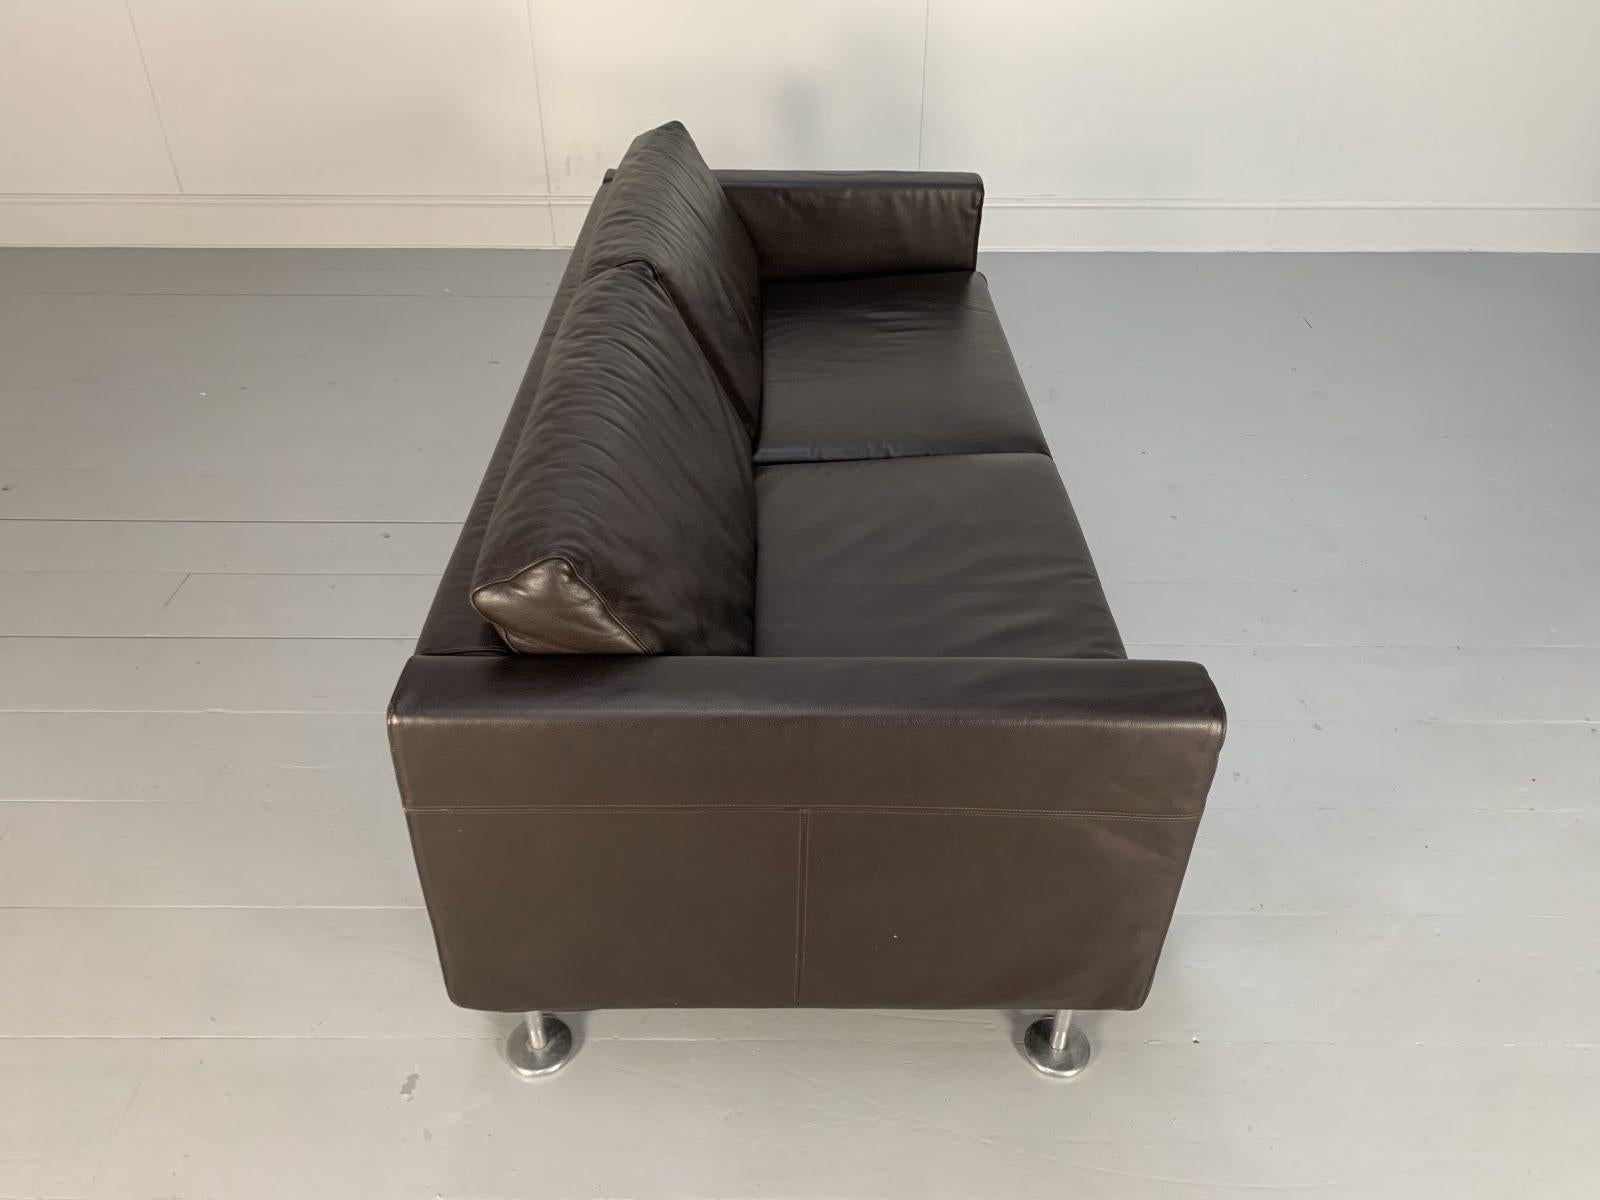 Vitra “Park” 2-Seat Sofa, in Dark Brown Leather For Sale 5